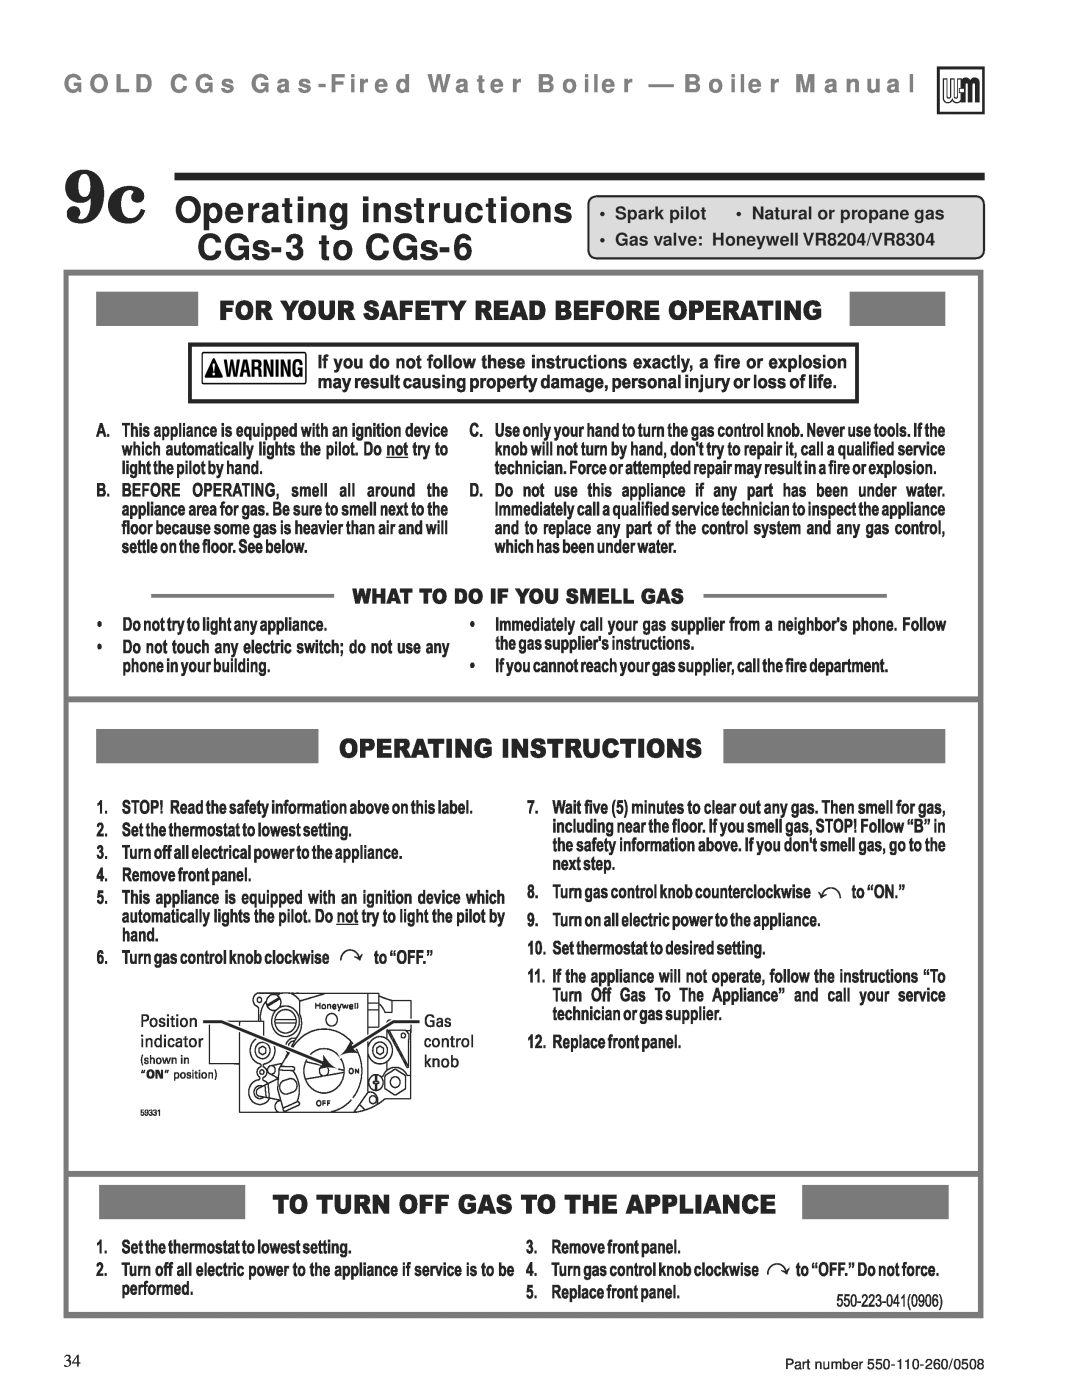 Weil-McLain 550-110-260/0508 manual 9c Operating instructions CGs-3to CGs-6, GOLD CGs Gas-FiredWater Boiler — Boiler Manual 